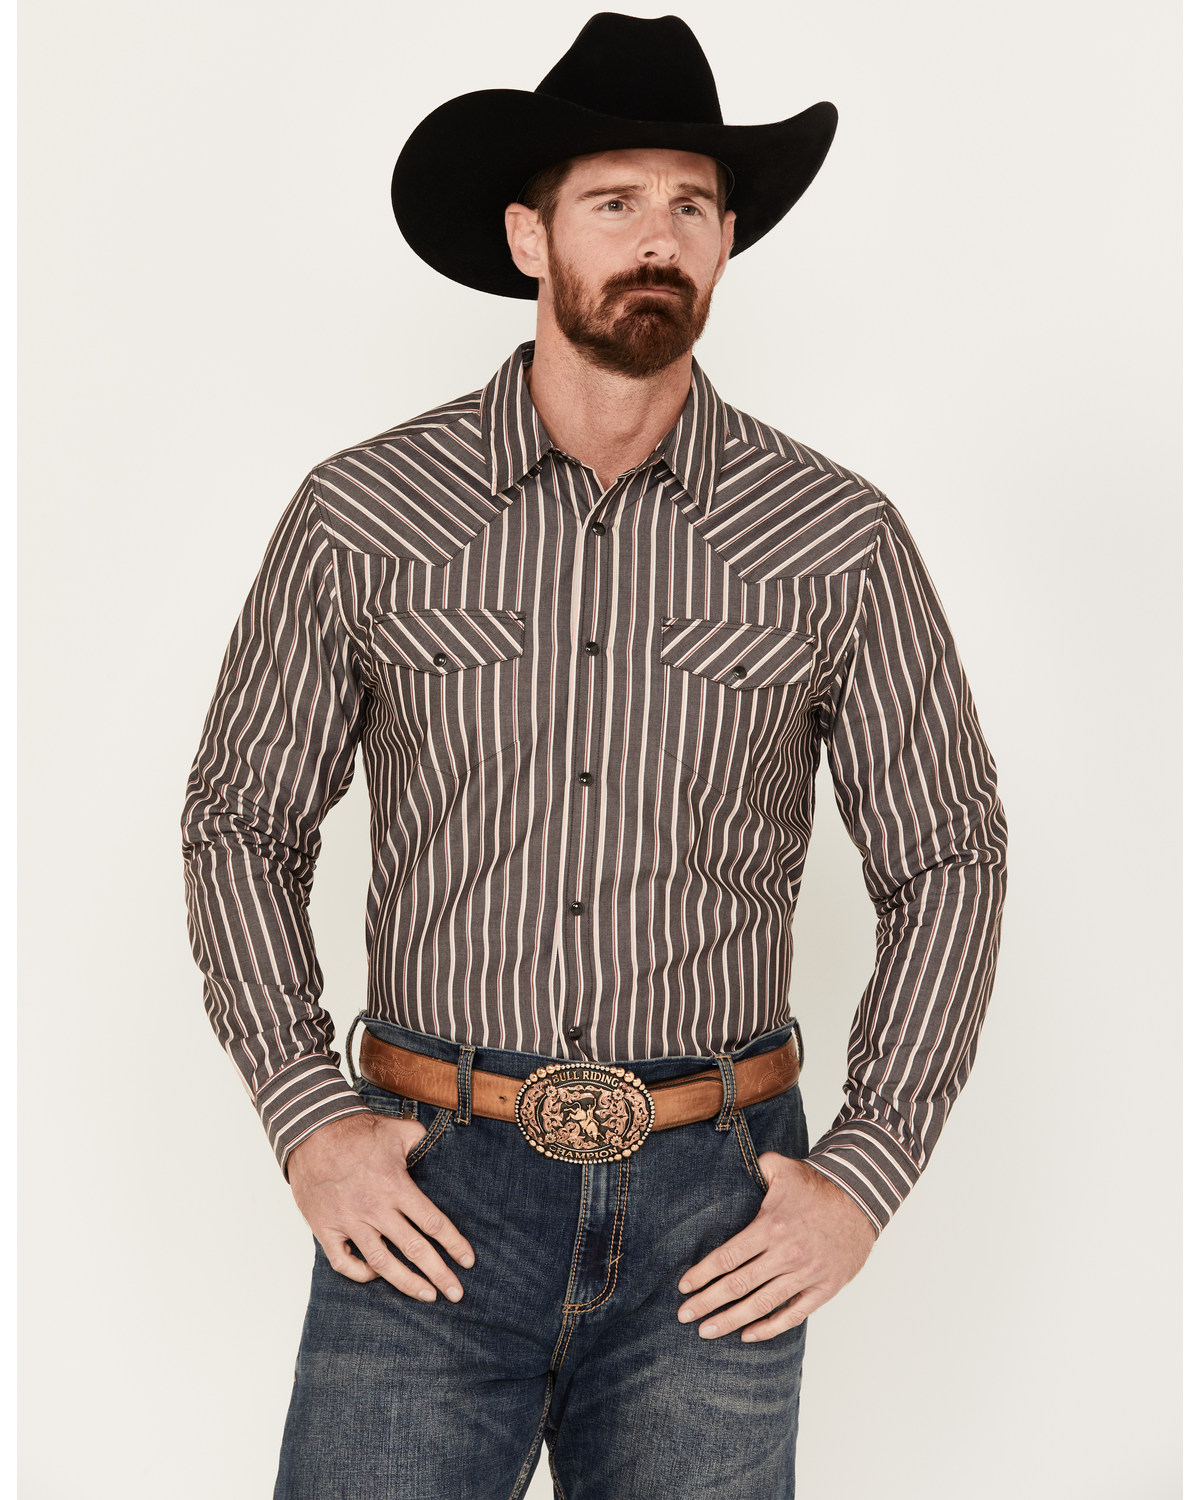 Gibson Trading Co. Men's Salute Striped Long Sleeve Snap Western Shirt